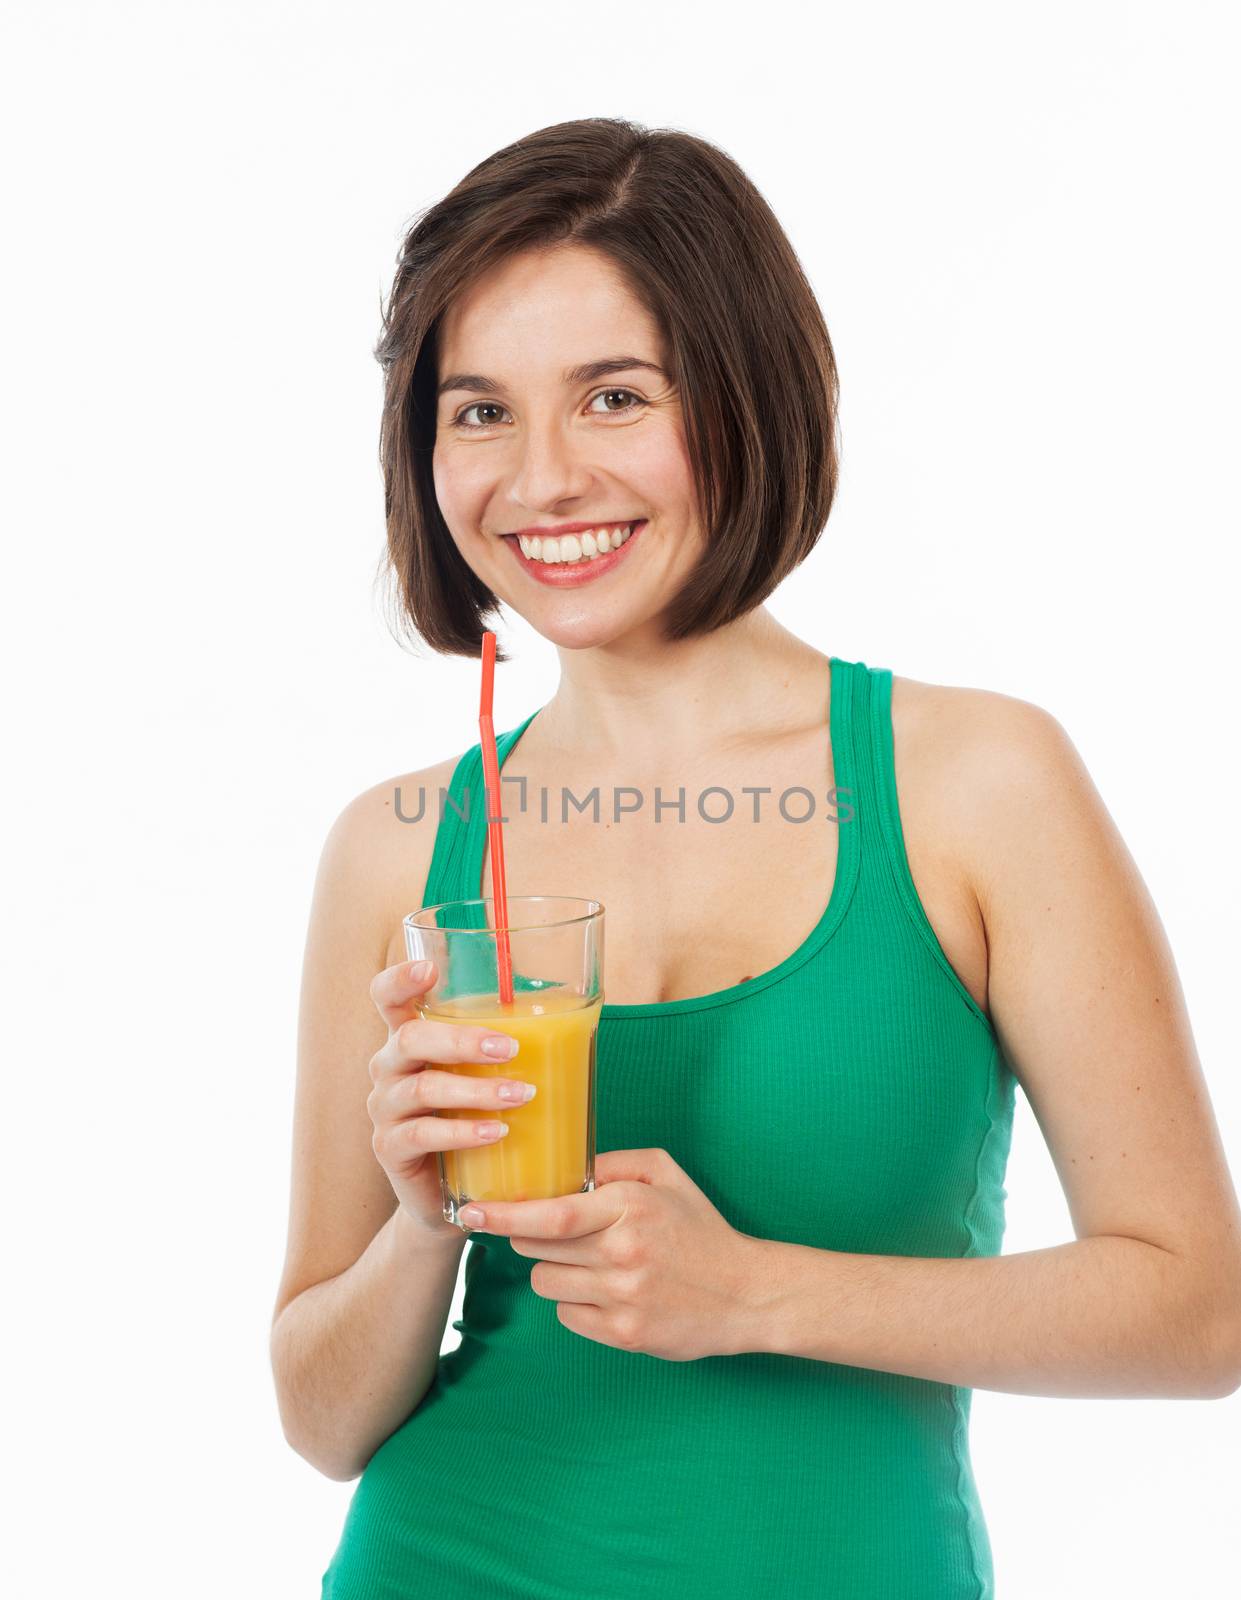 Portrait of a young woman drinking an orange juice with a straw, isolated on white